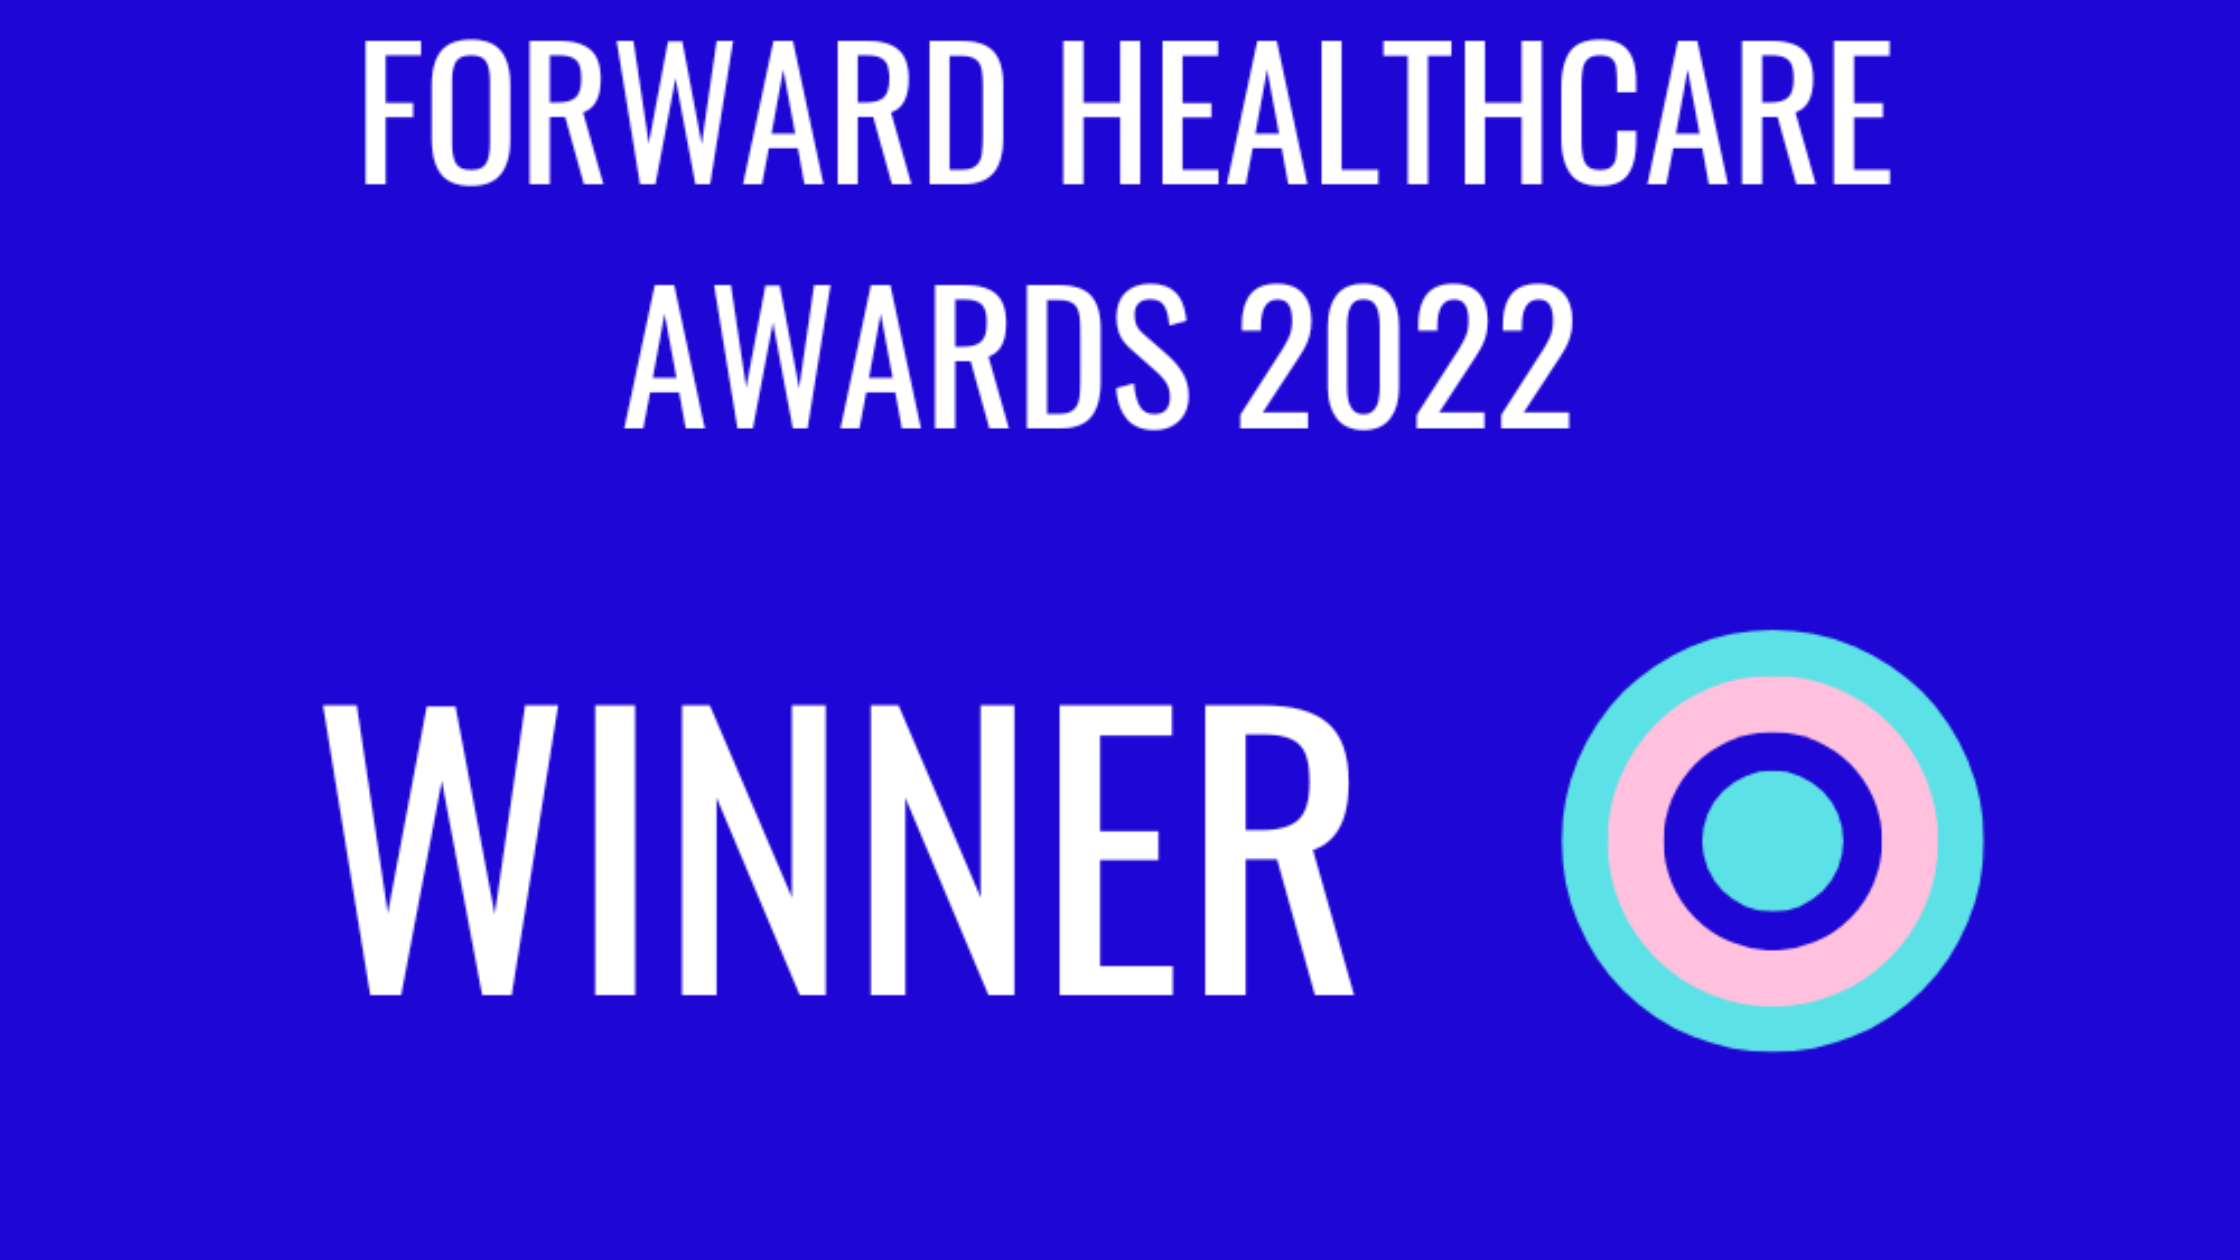 Careology wins 'Excellence In Supporting Patients and Healthcare Teams' award at the Forward Healthcare Awards 2022